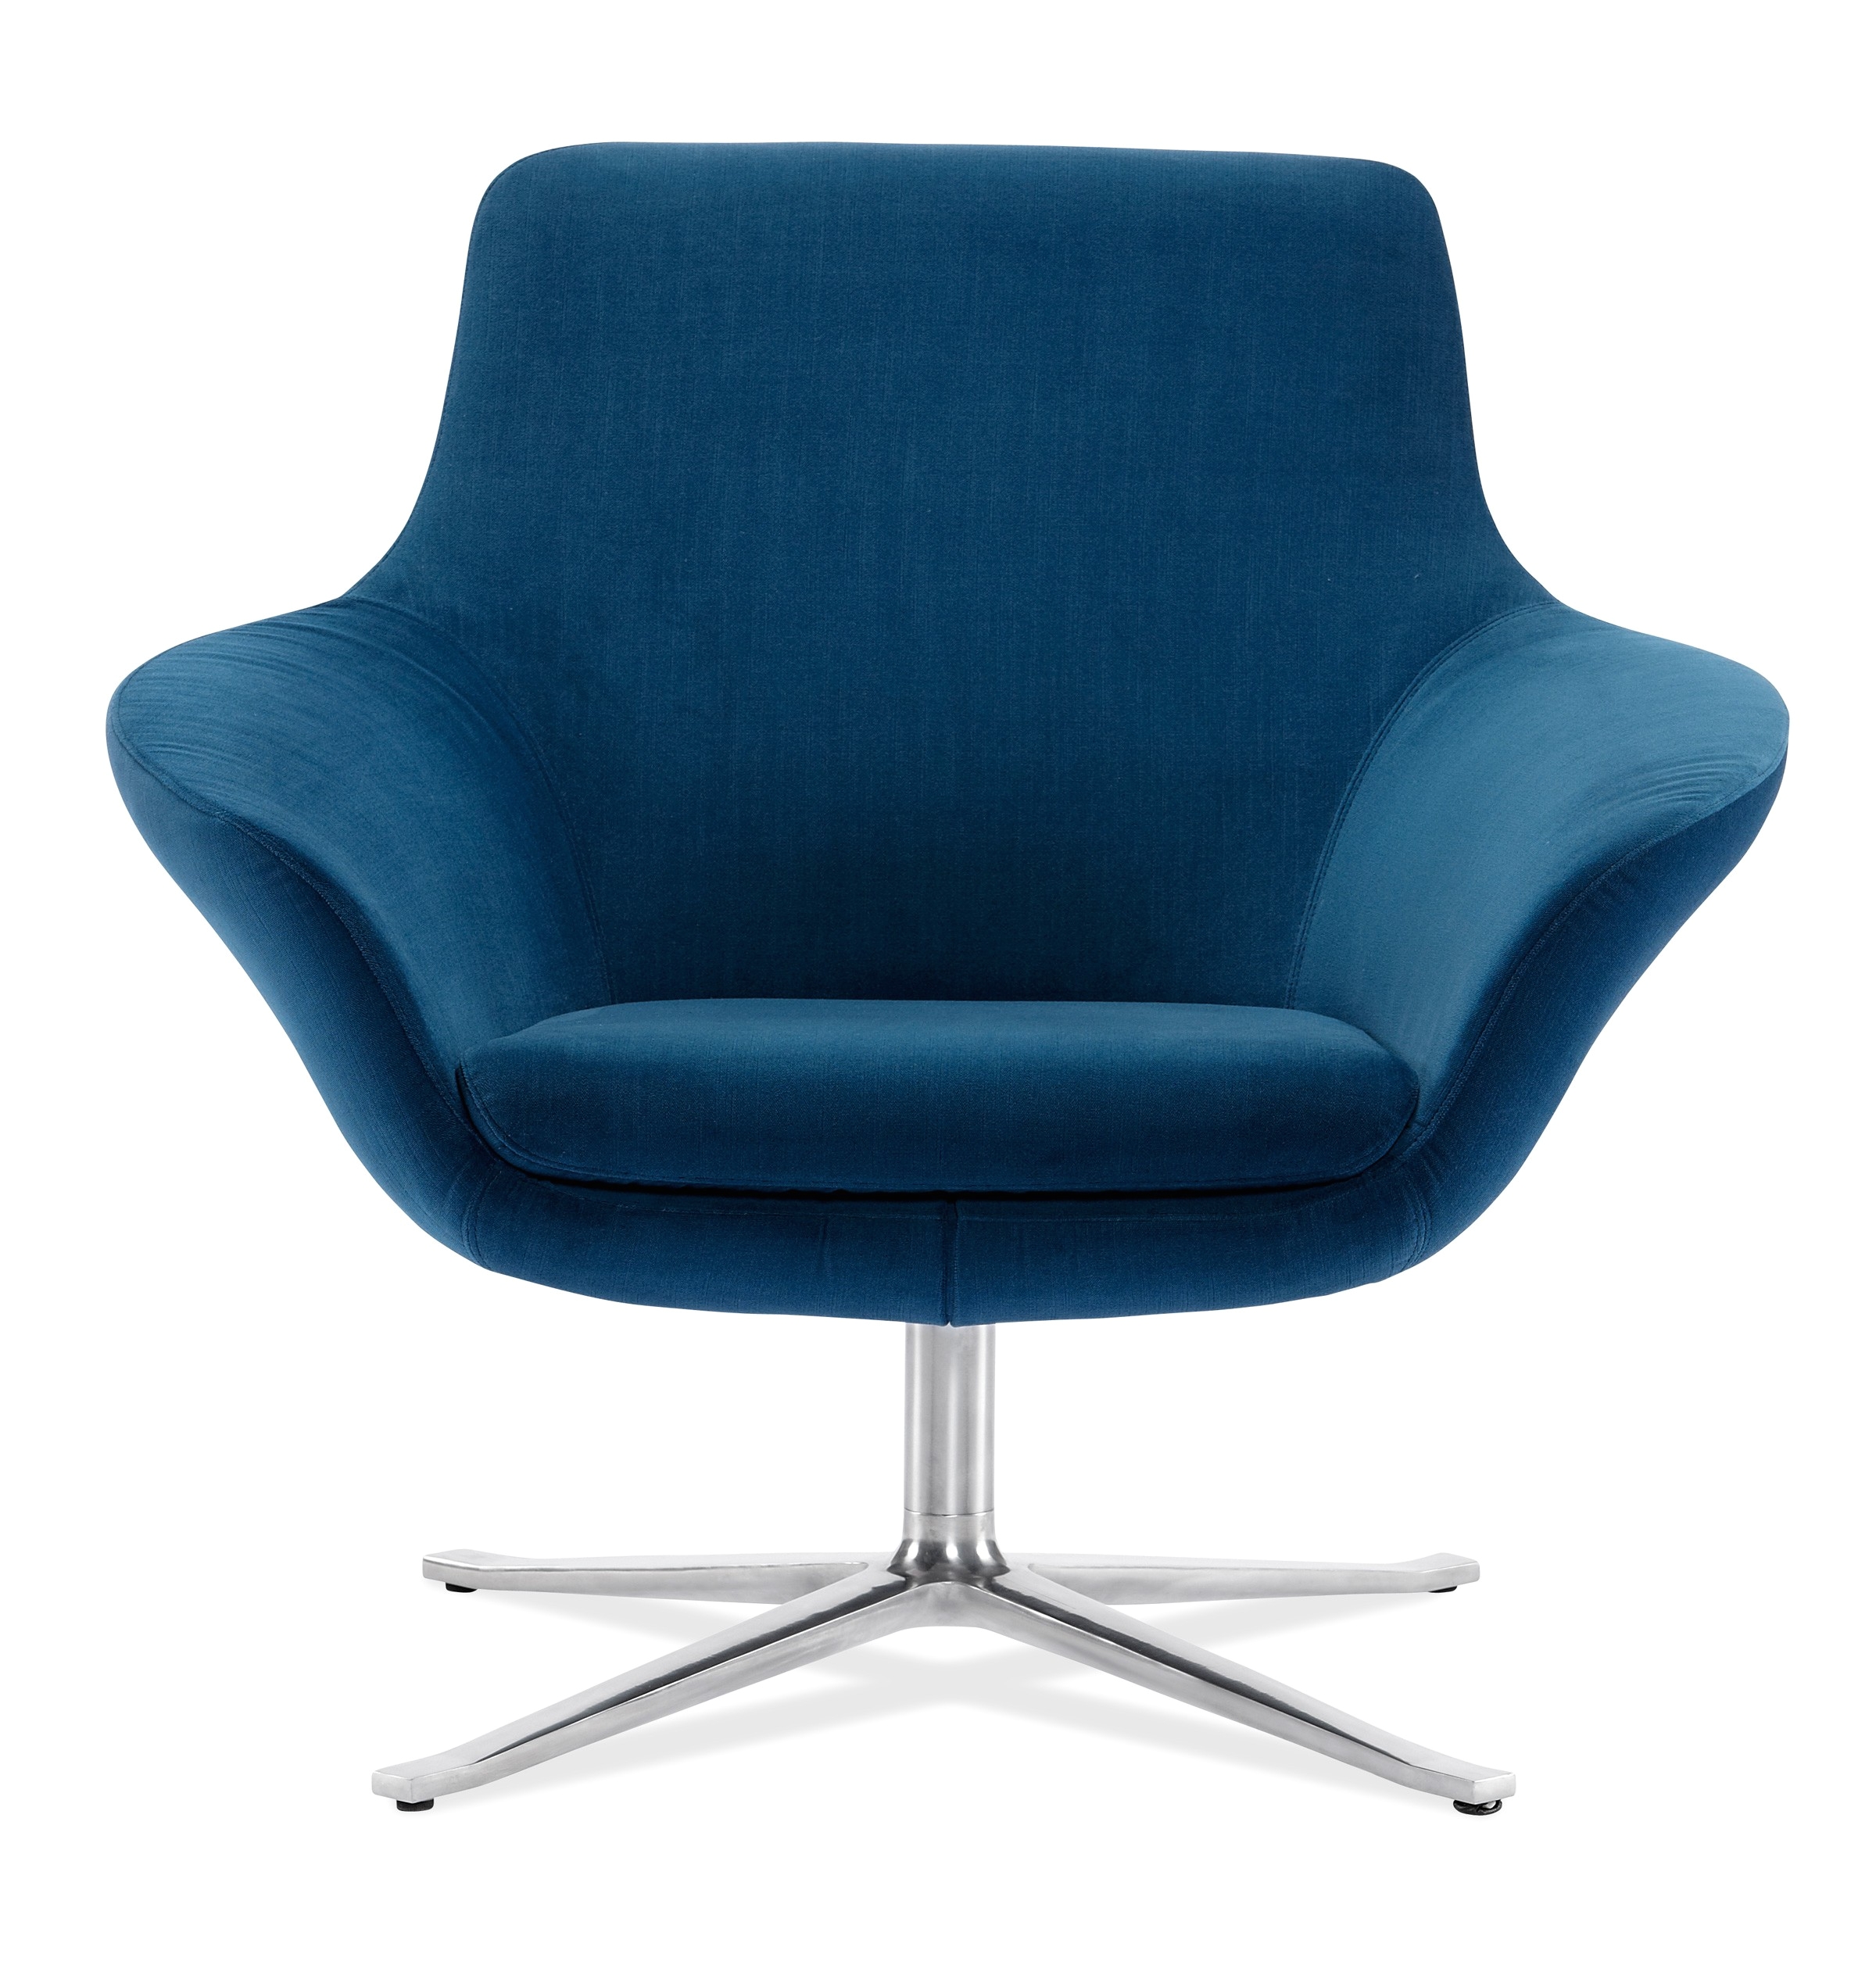 Coalesse Bob Chair Dimensions Bob Contemporary Comfortable Lounge Chairs Coalesse